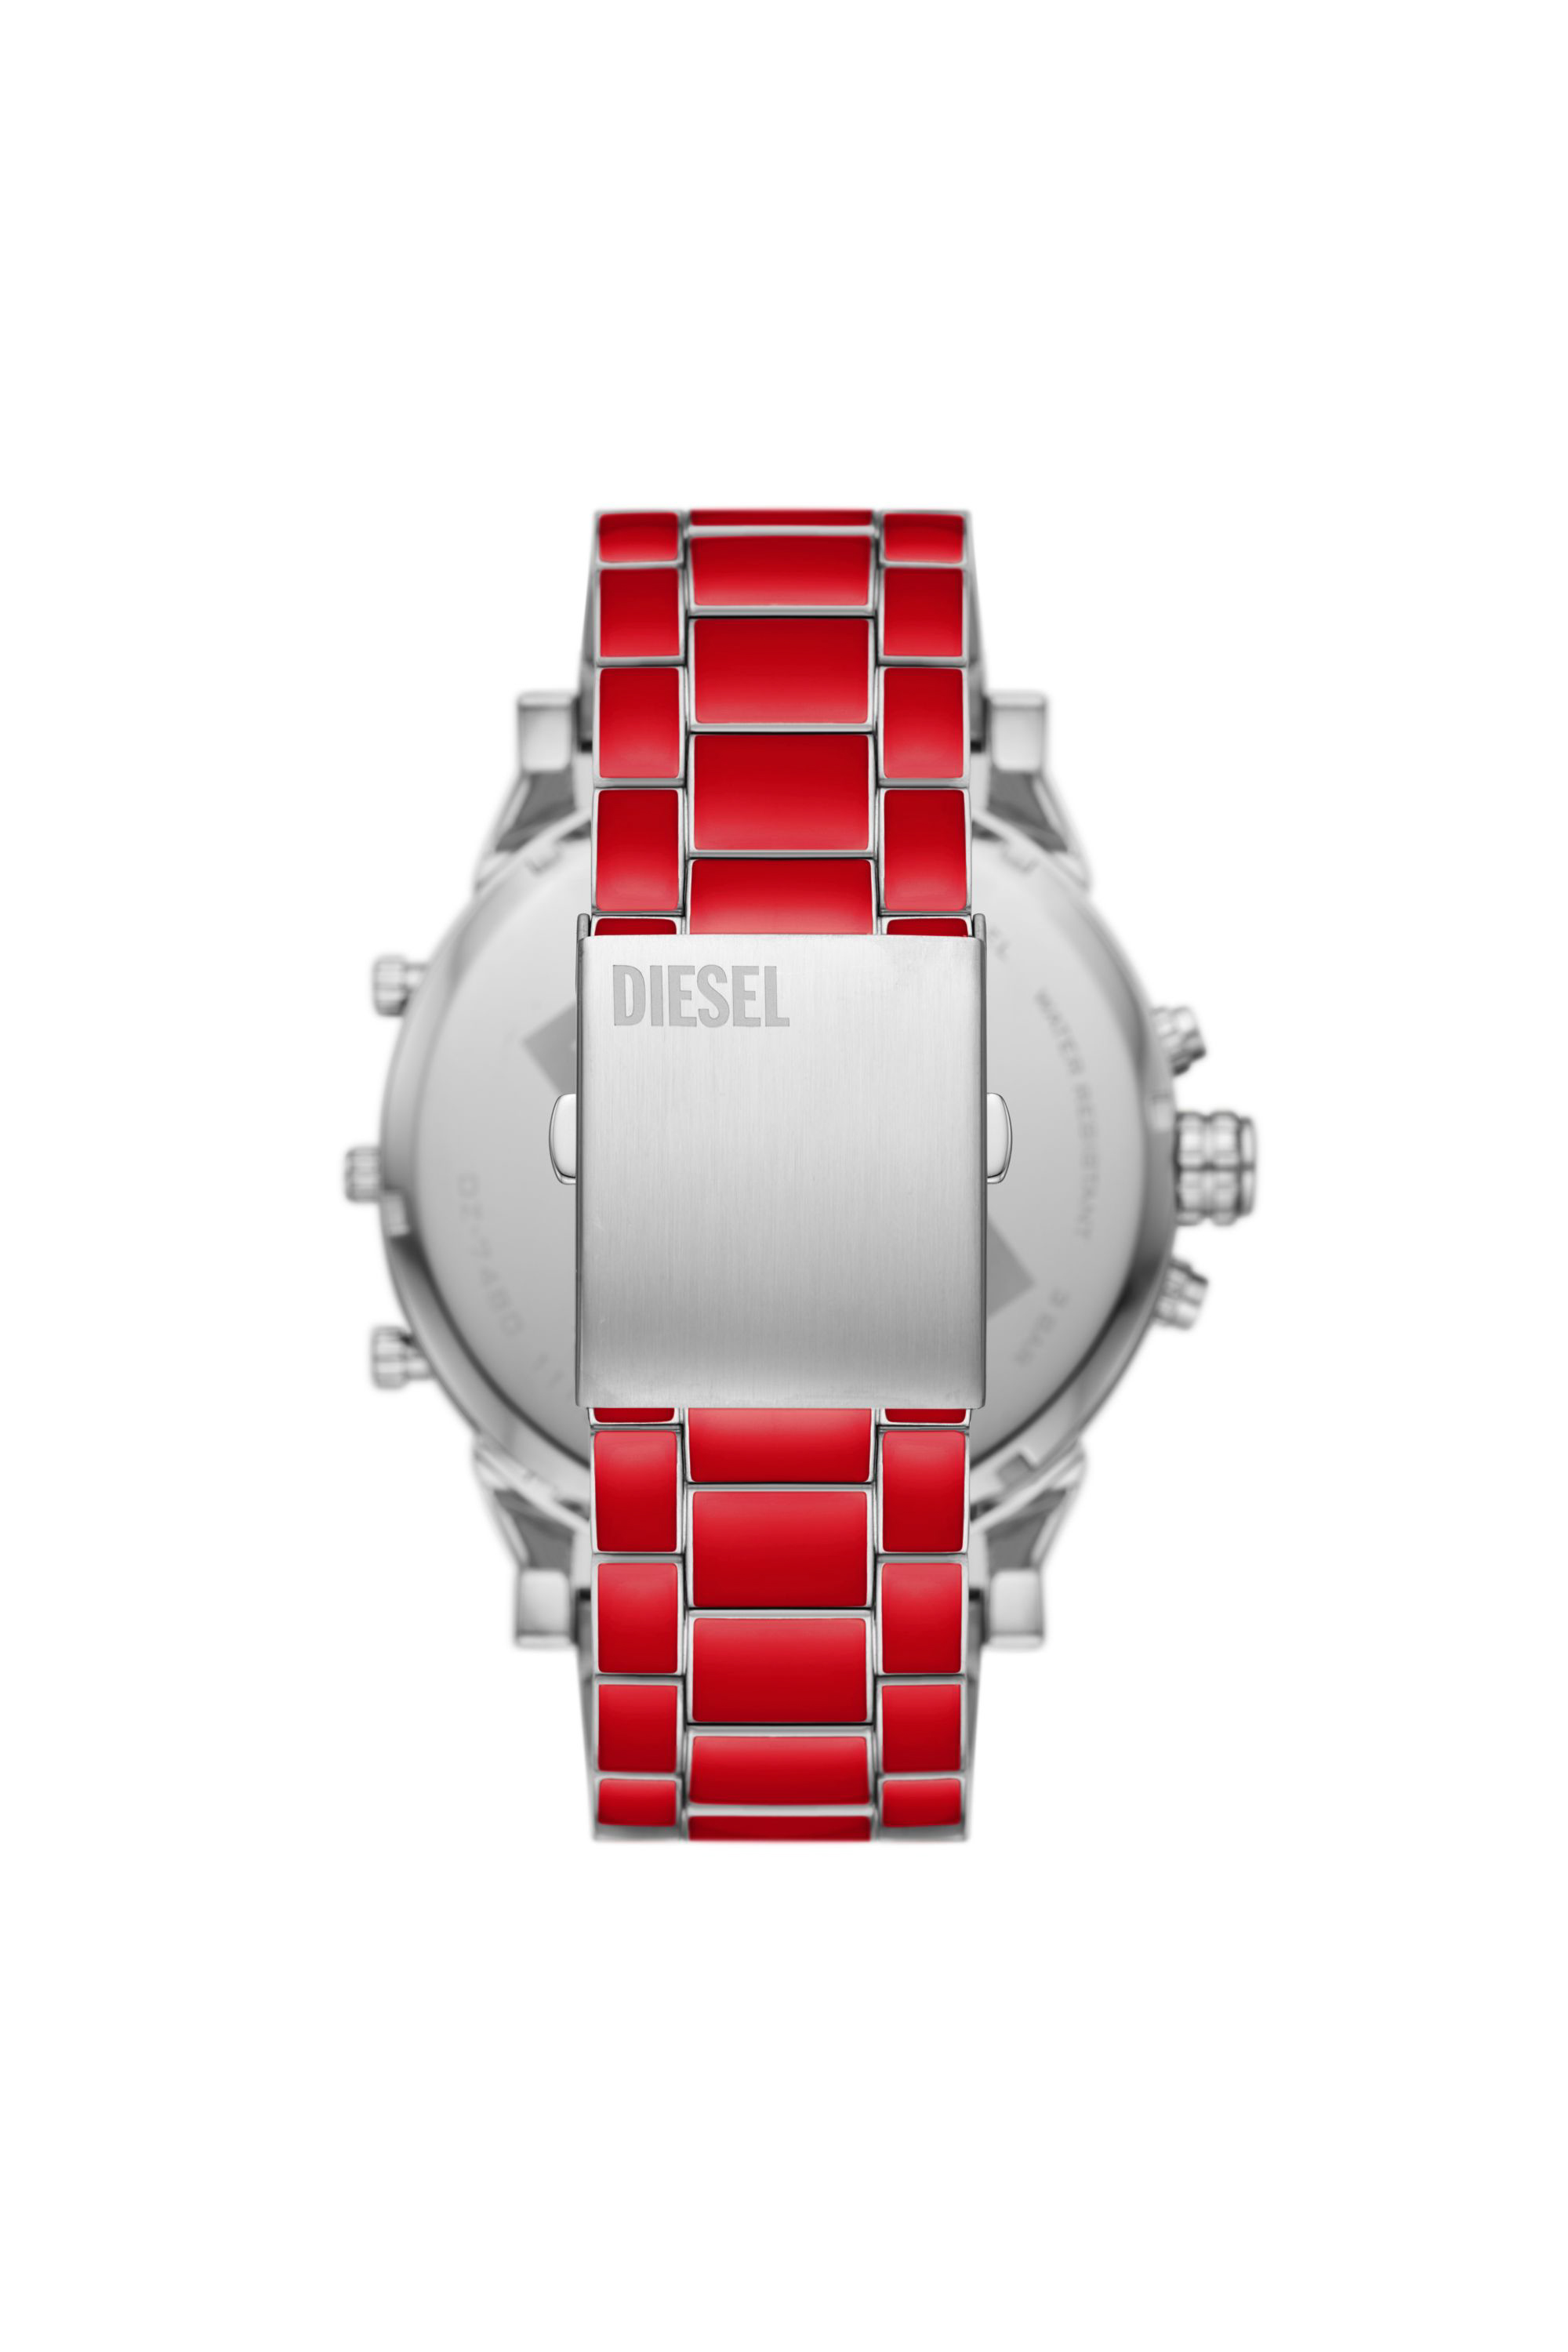 Diesel - DZ7480, Man Mr. Daddy 2.0 red enamel and stainless steel watch in Red - Image 2